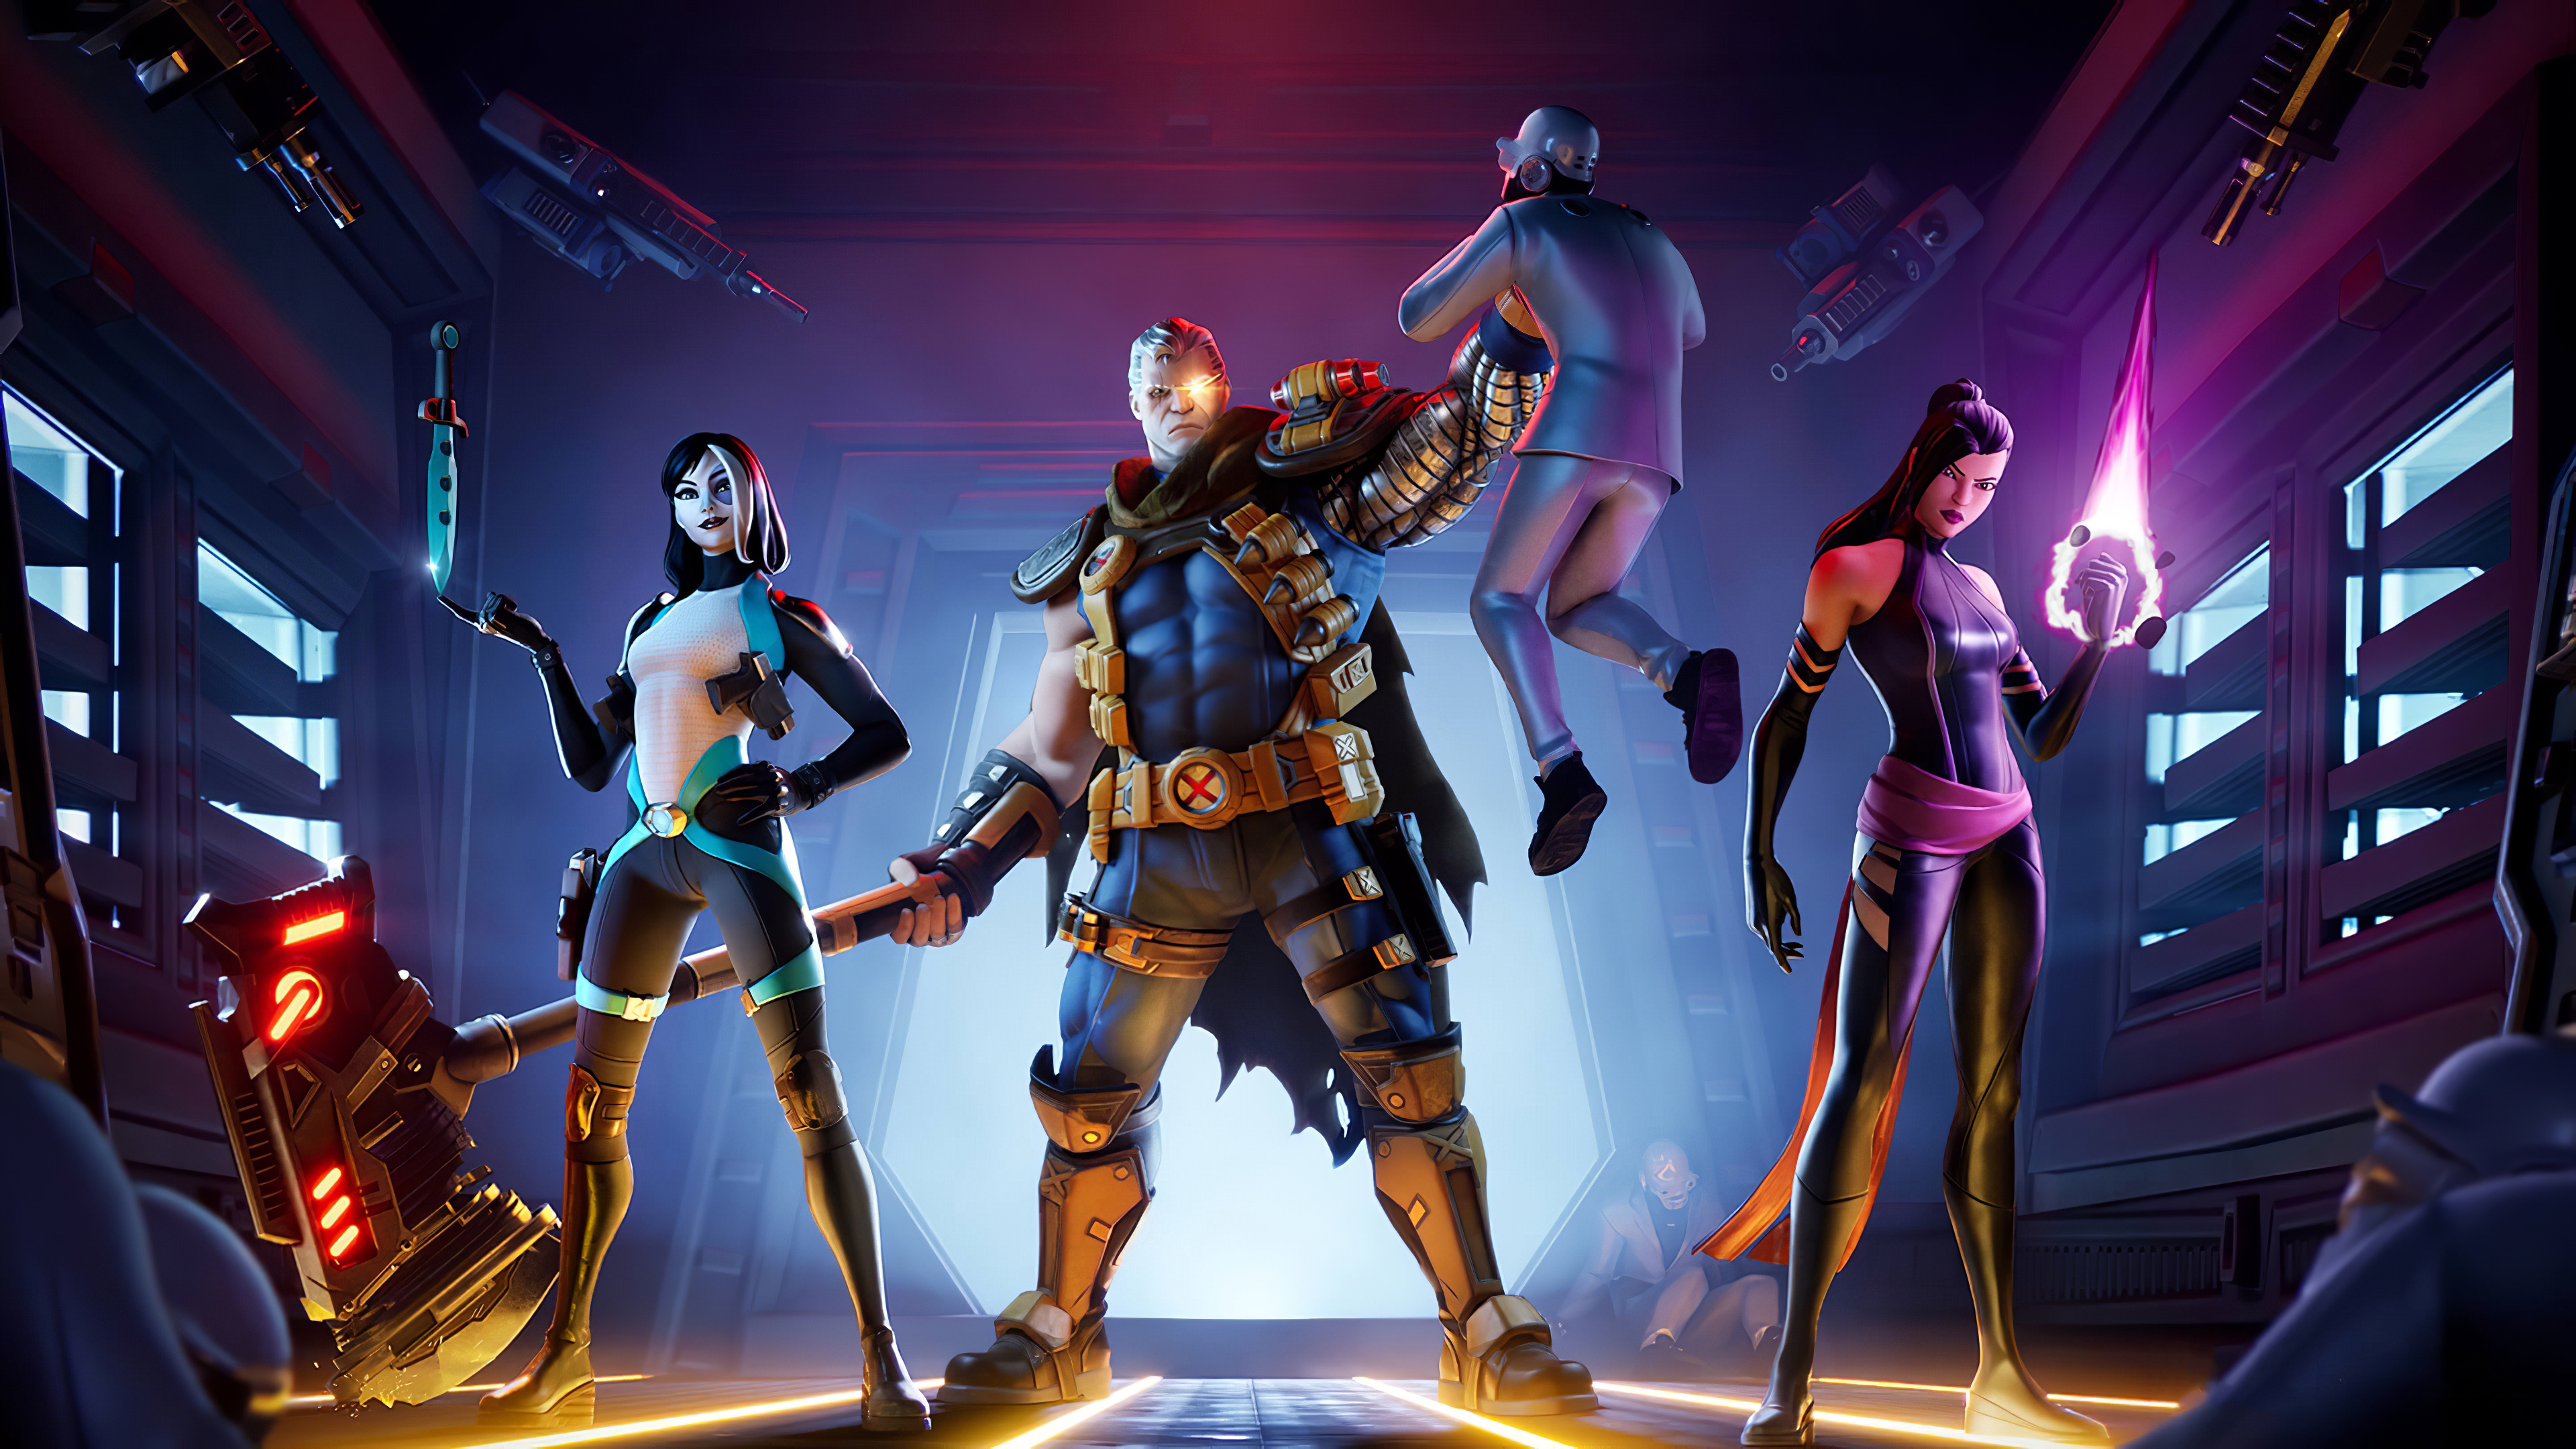 The Ace Fortnite Wallpapers